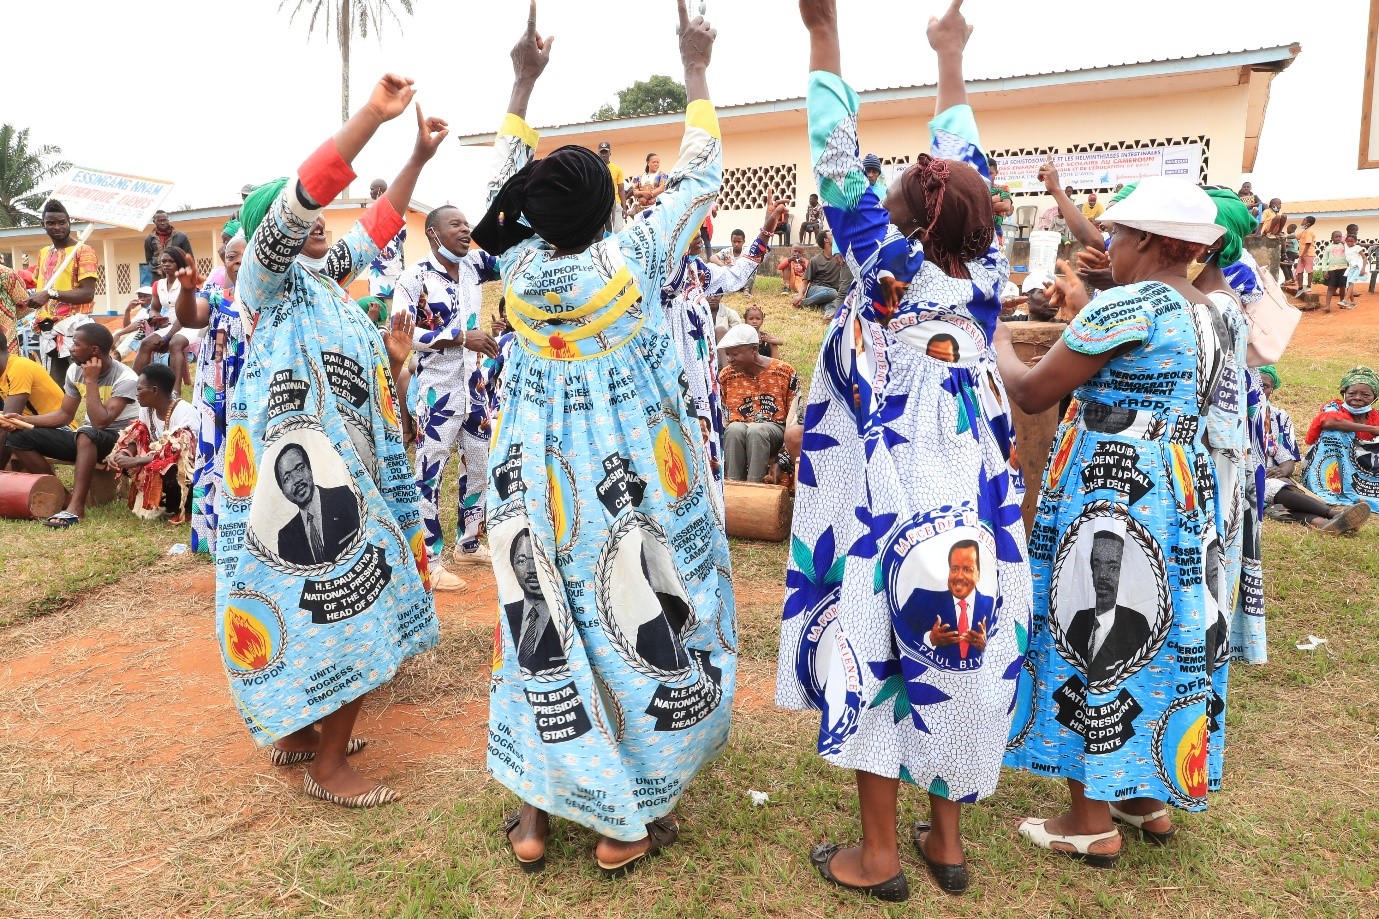 Women activists dancing and singing at a meeting of the Rassemblement Démocratique du Peuple Camerounais, political party of the actual president Paul Biya, in Ayos, a town situated at 403 kms from the capital Yaoundé, during the 2018 presidential electoral campaign.  